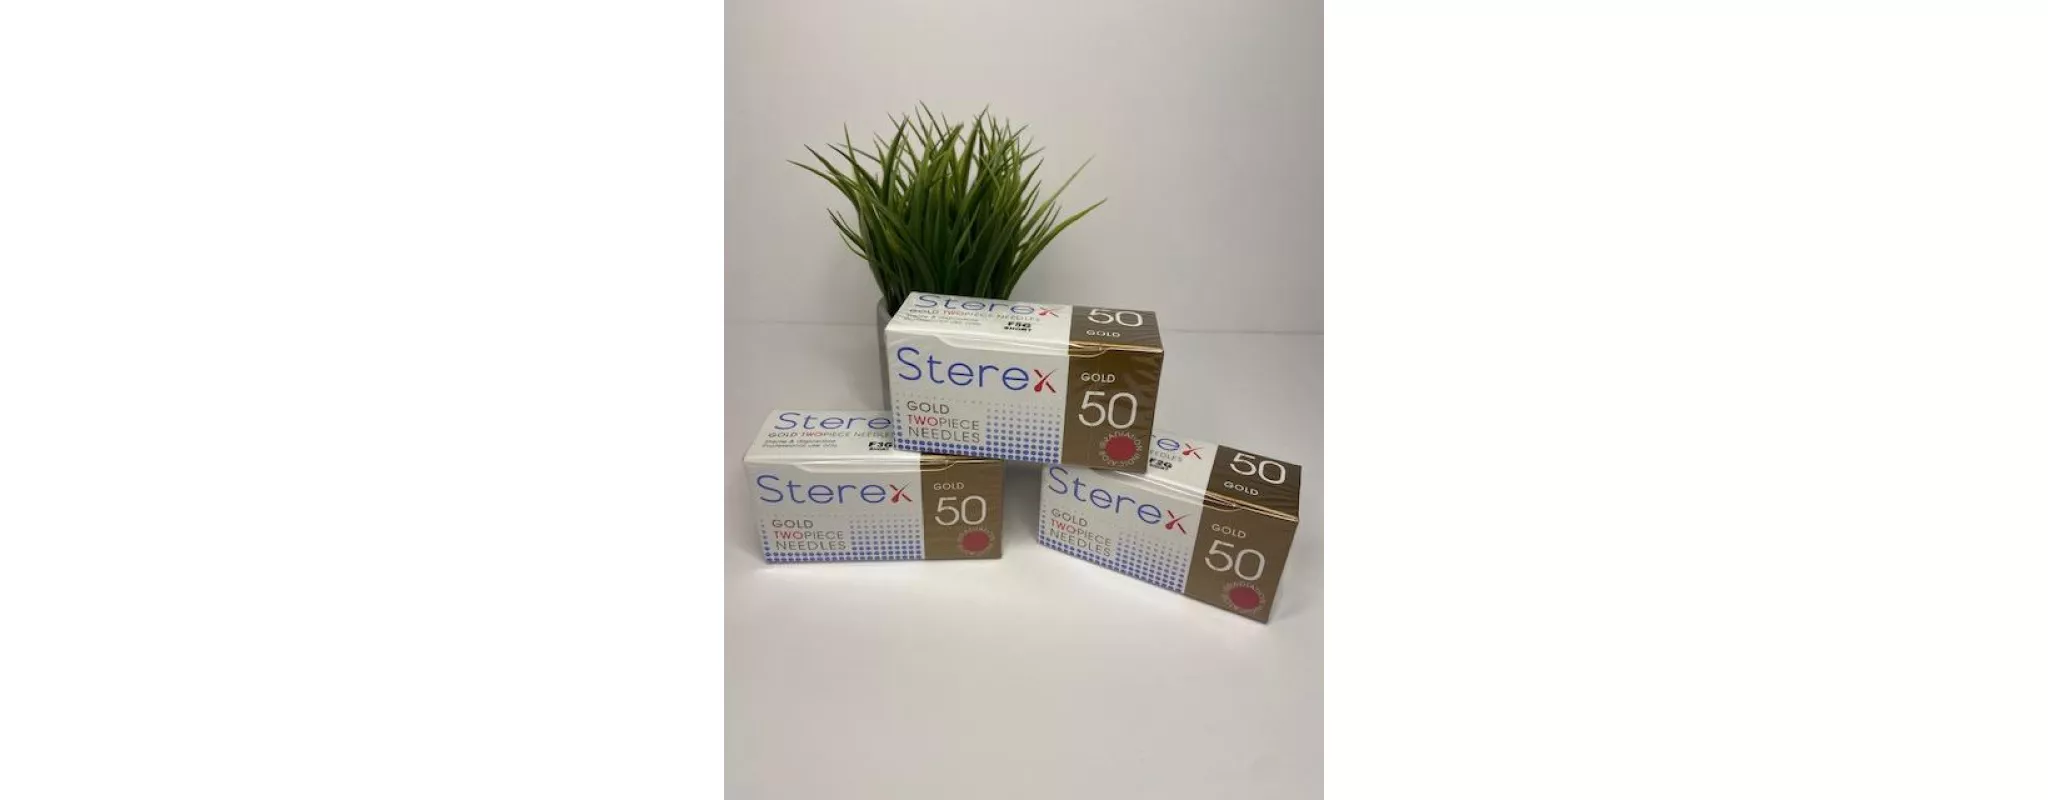 Sterex 2 piece Gold needles in a variety of sizes